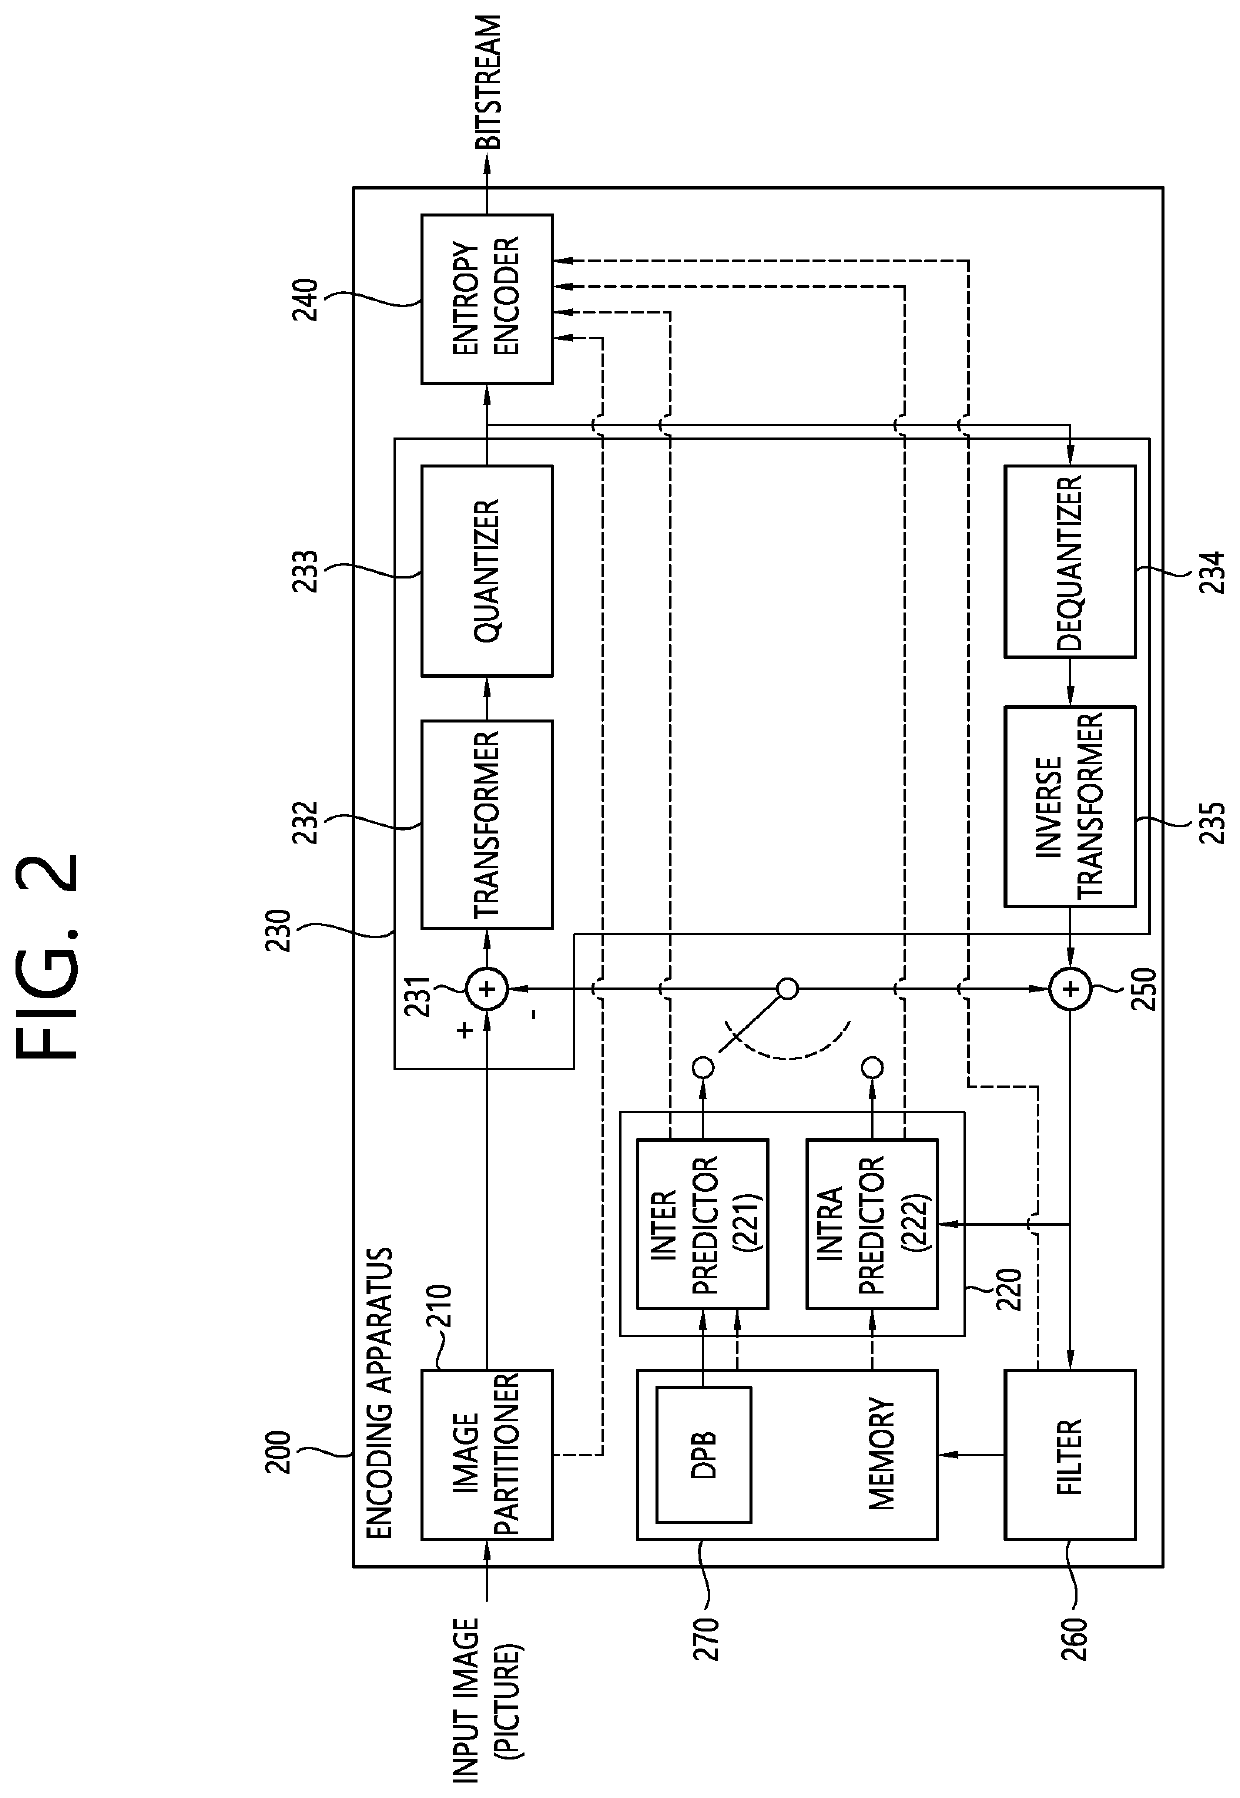 Intra prediction-based video coding method and device using mpm list